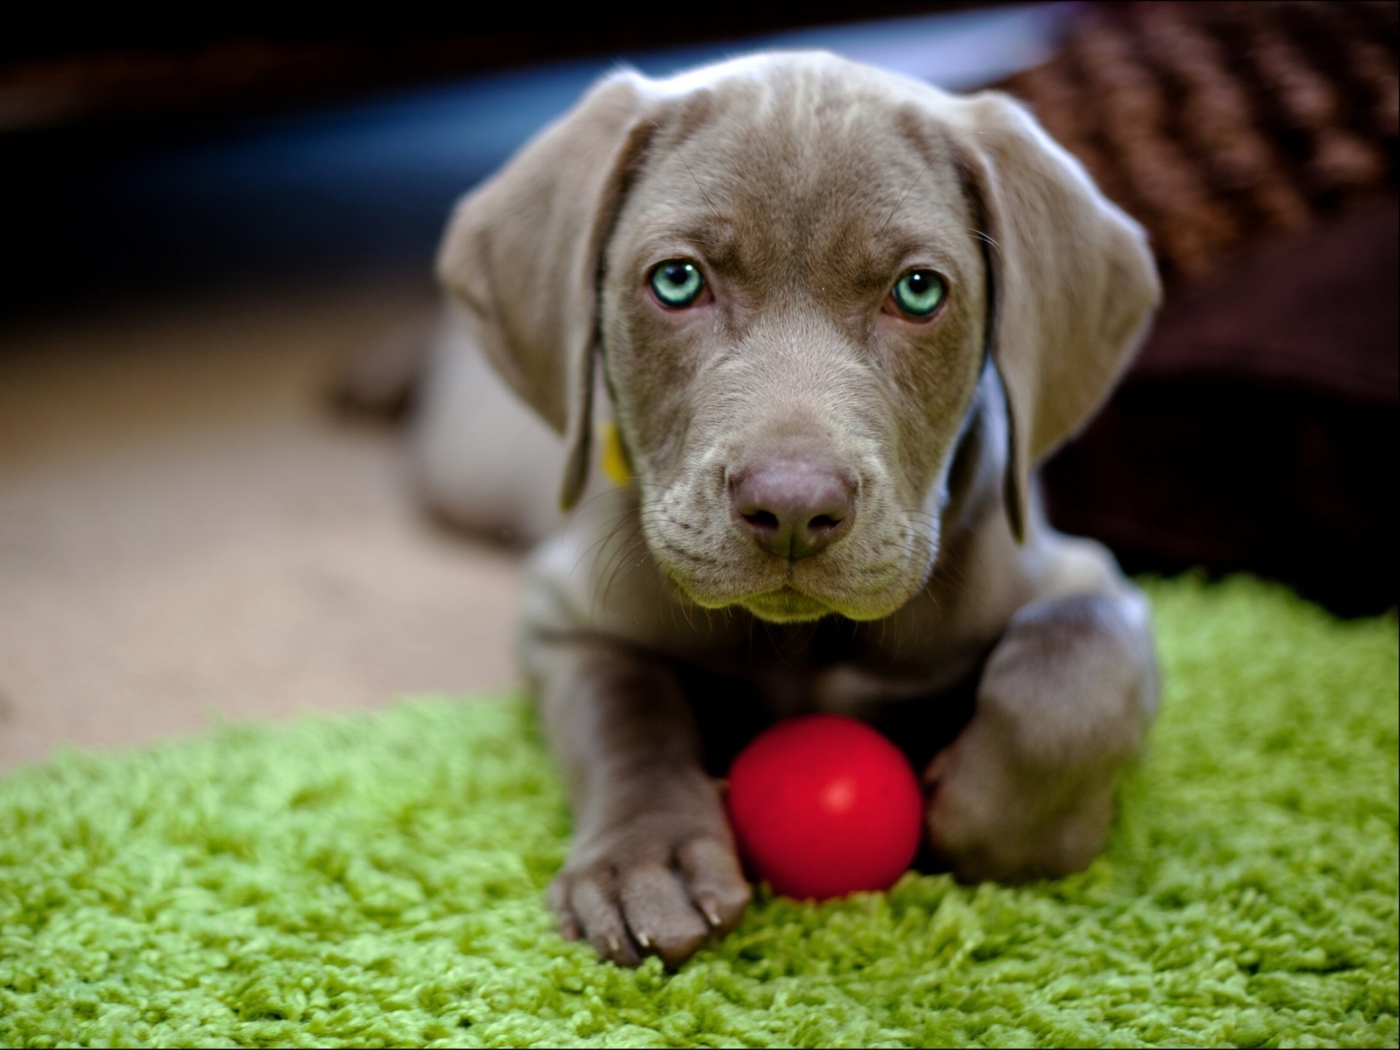 Cute Puppy With Red Ball wallpaper 1400x1050